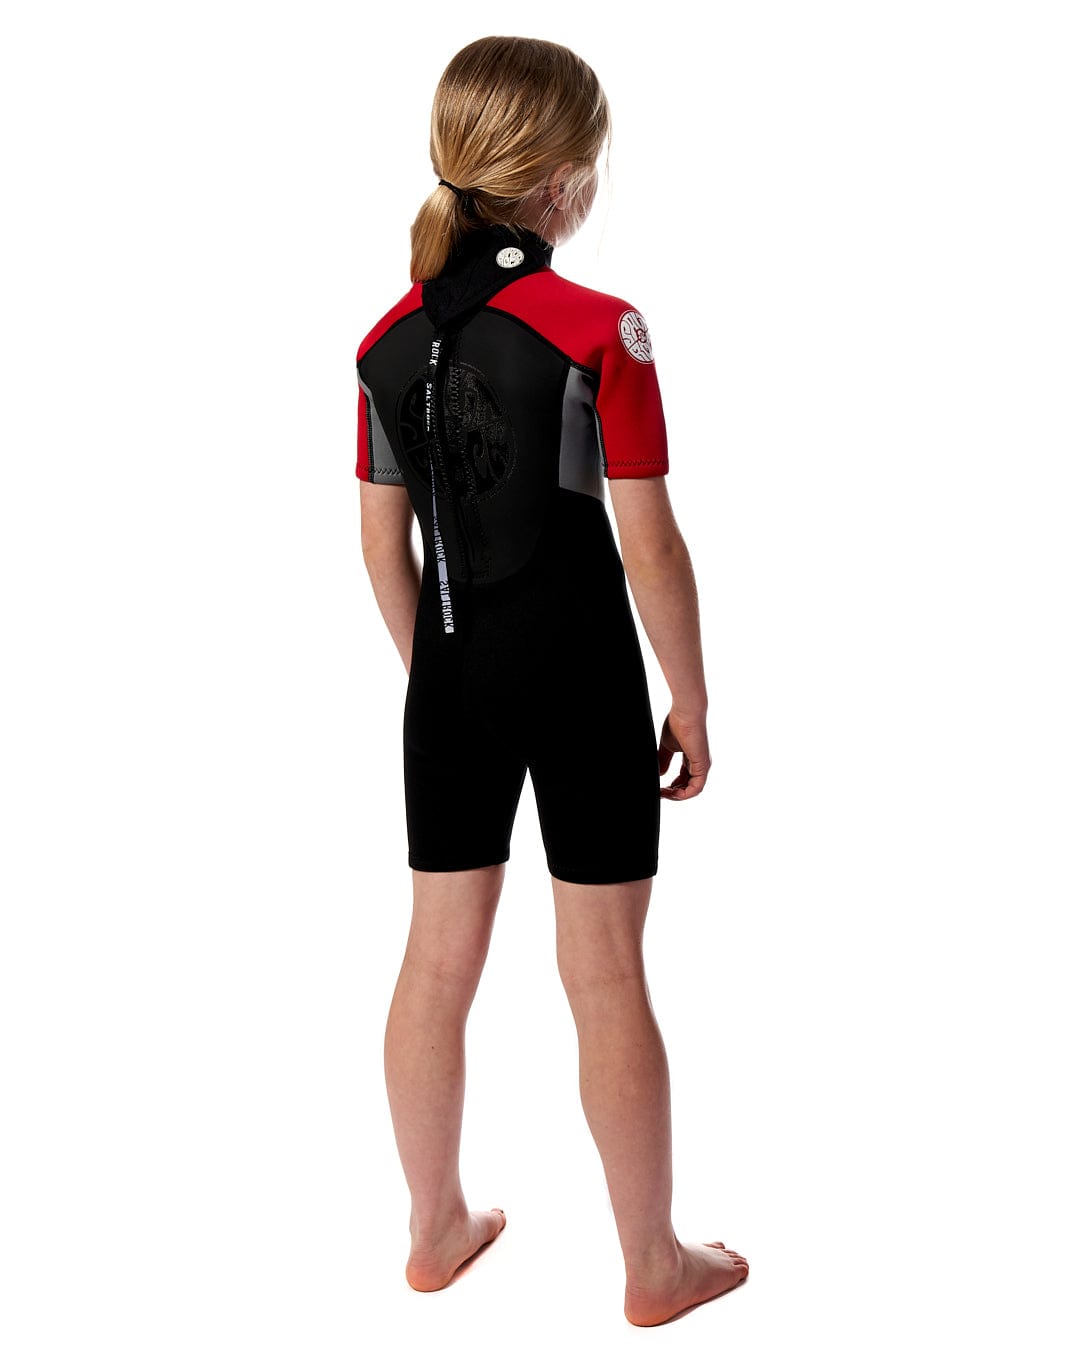 The back view of a girl in a Saltrock Core - 3/2 Shortie Wetsuit - Red.